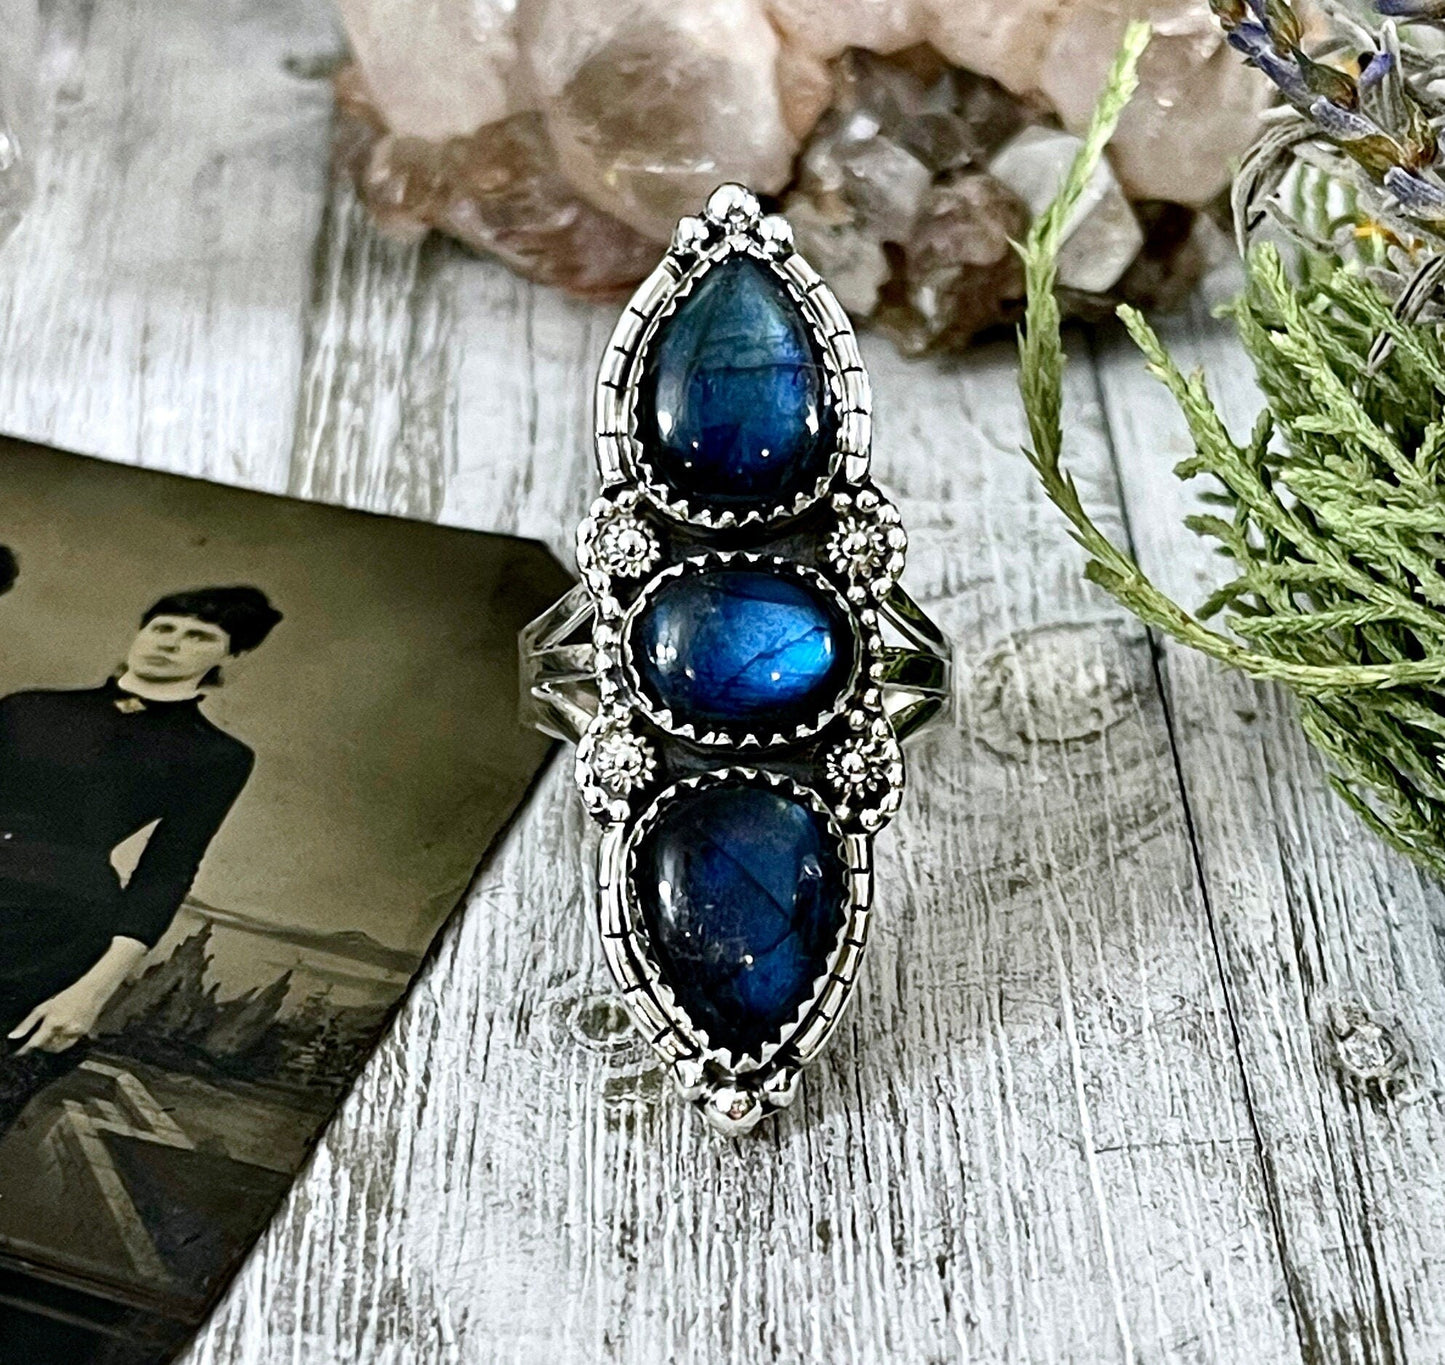 3 Stone Ring, Big Stone Ring, Bohemian Ring, Boho Jewelry, Boho Ring, Crystal Ring, Etsy Id 1143395447, Etsy ID: 1608022969, Festival Jewelry, Foxlark Alchemy, Foxlark- Rings, Gift For Woman, Gypsy Ring, Jewelry, Rings, Statement Rings, Wholesale